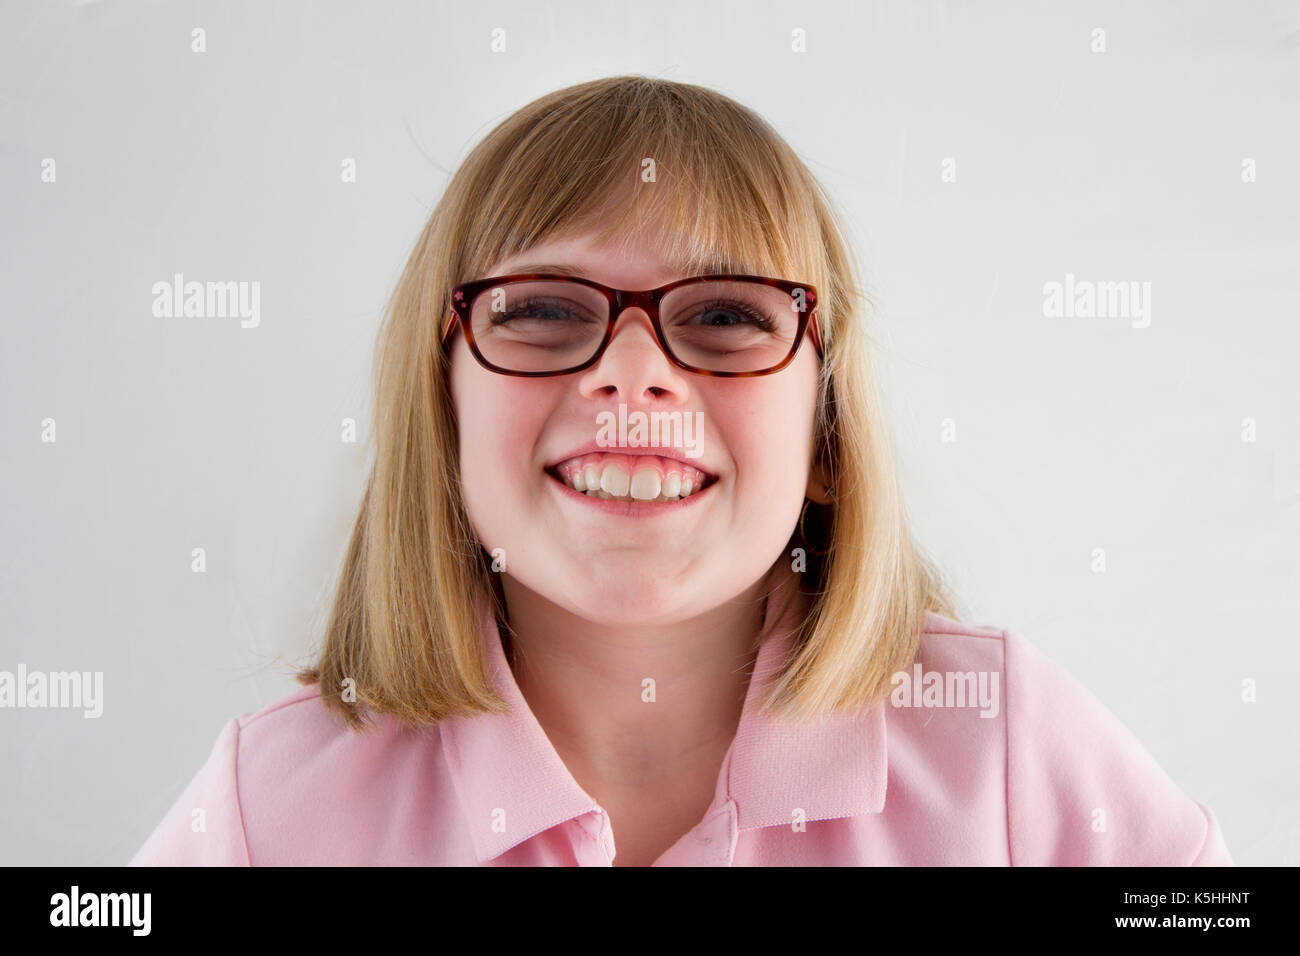 Young girl in her school uniform smiling at the camera Stock Photo